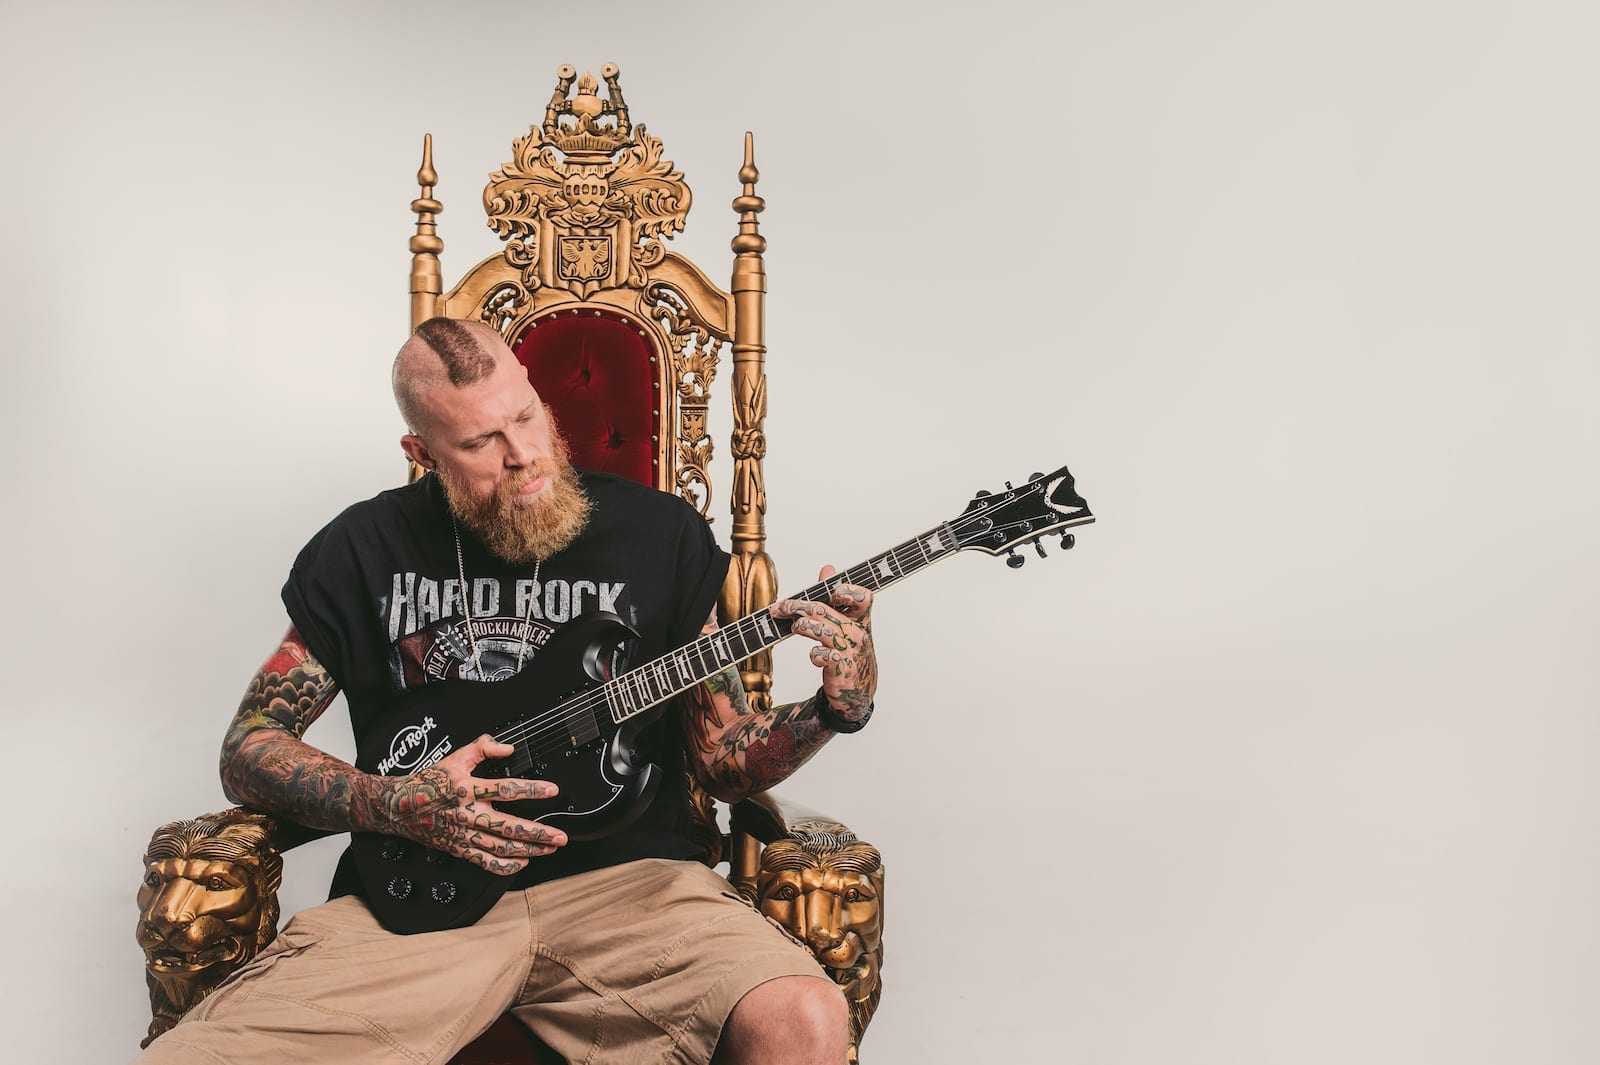 Bearded tattooed man playing a guitar on a throne posing for camera wearing a black Hard Rock tshirt